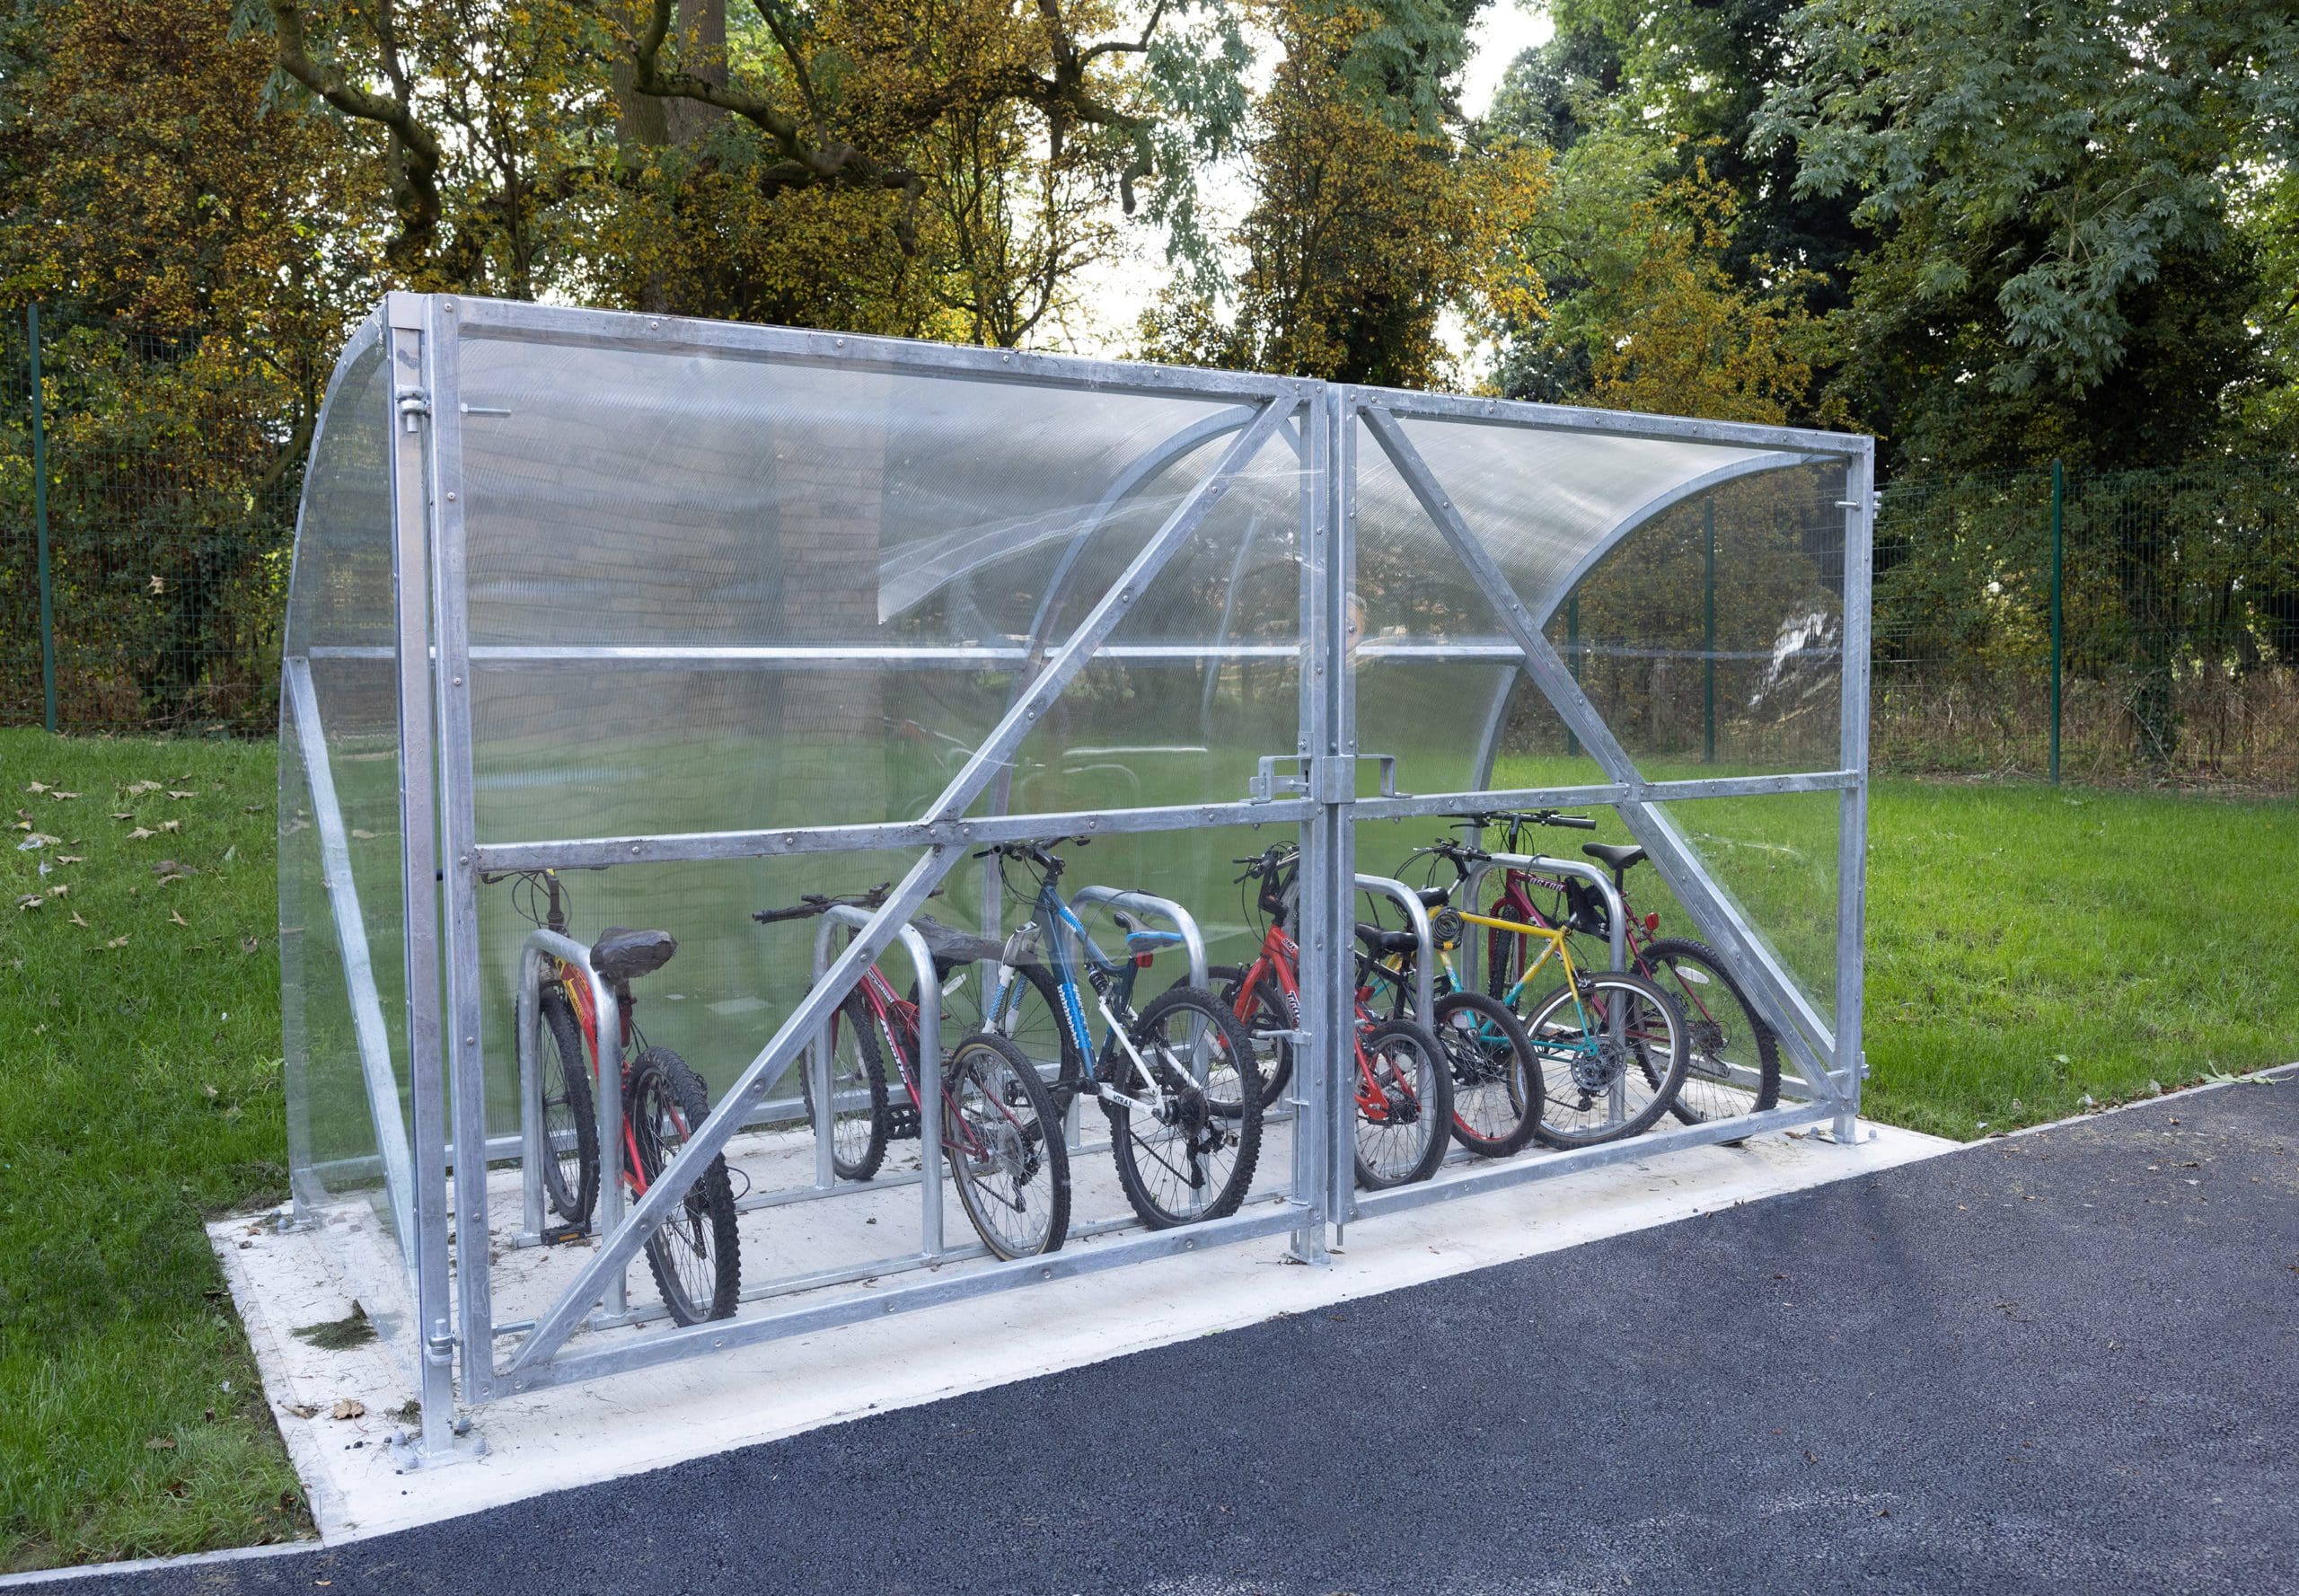 Metal outdoor bike racks with attached metal and see through canopy shelter and doors